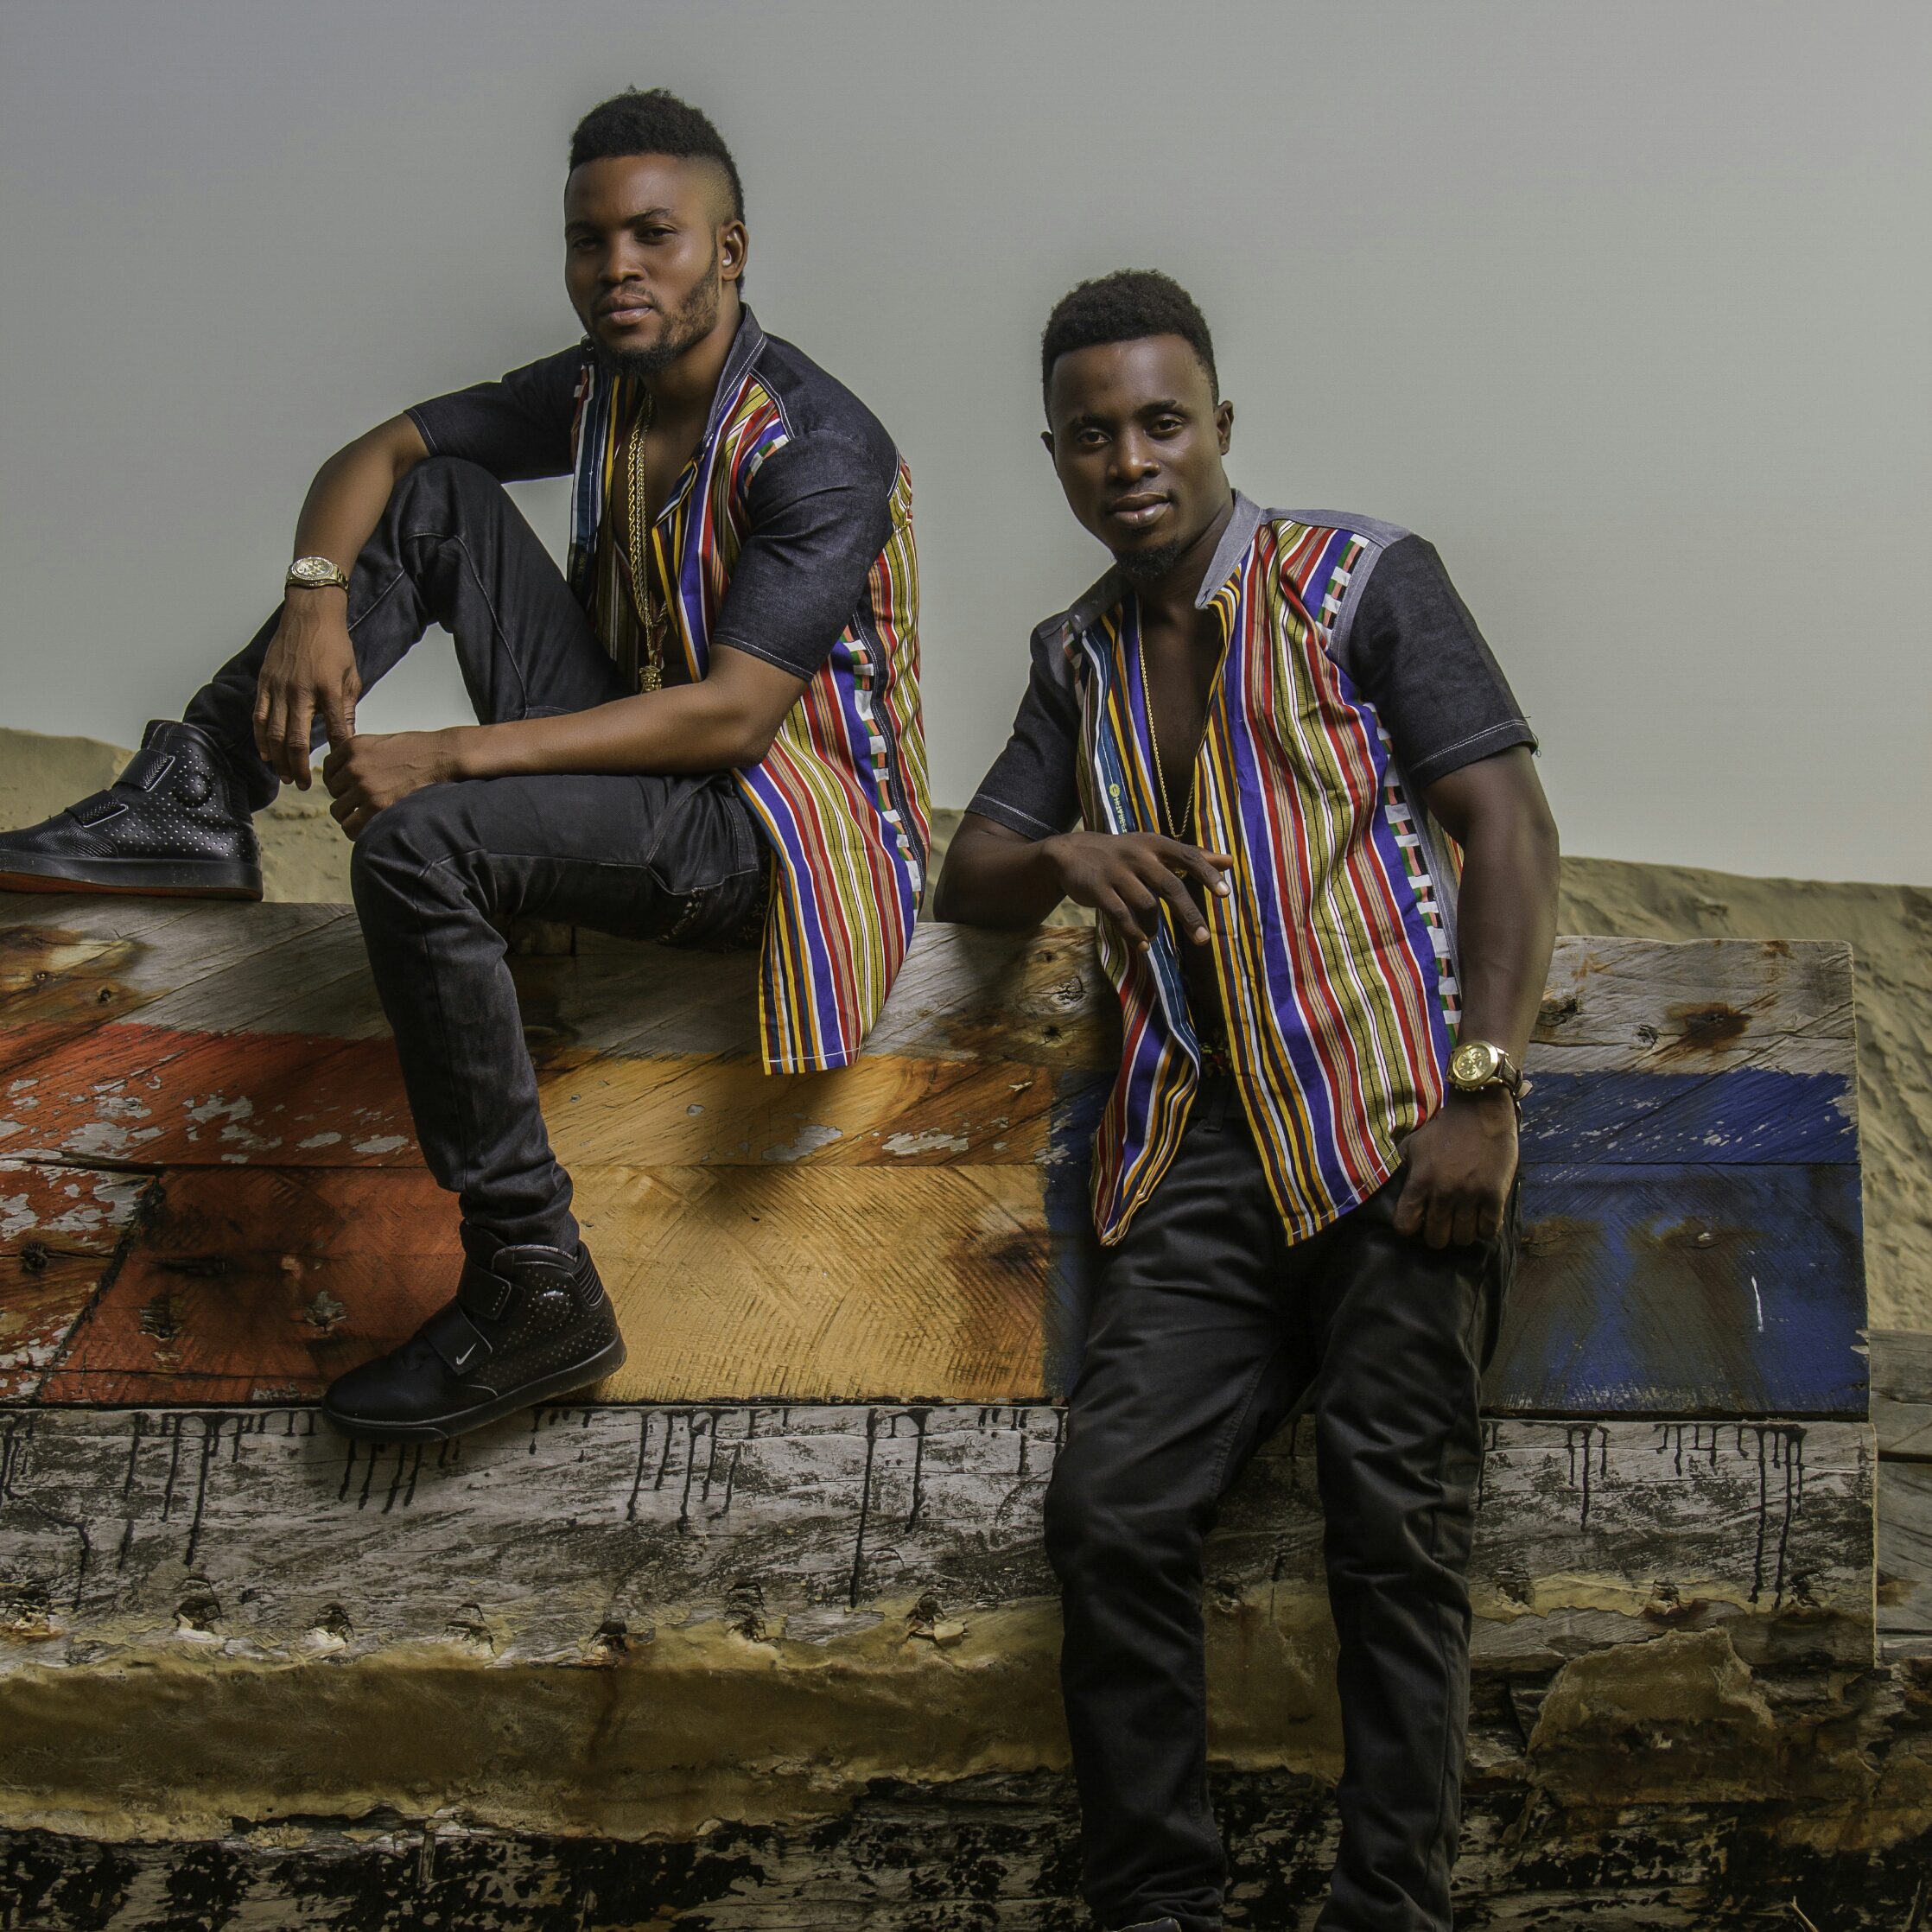 Don’t Compare Us to R2bees – Gallaxy.